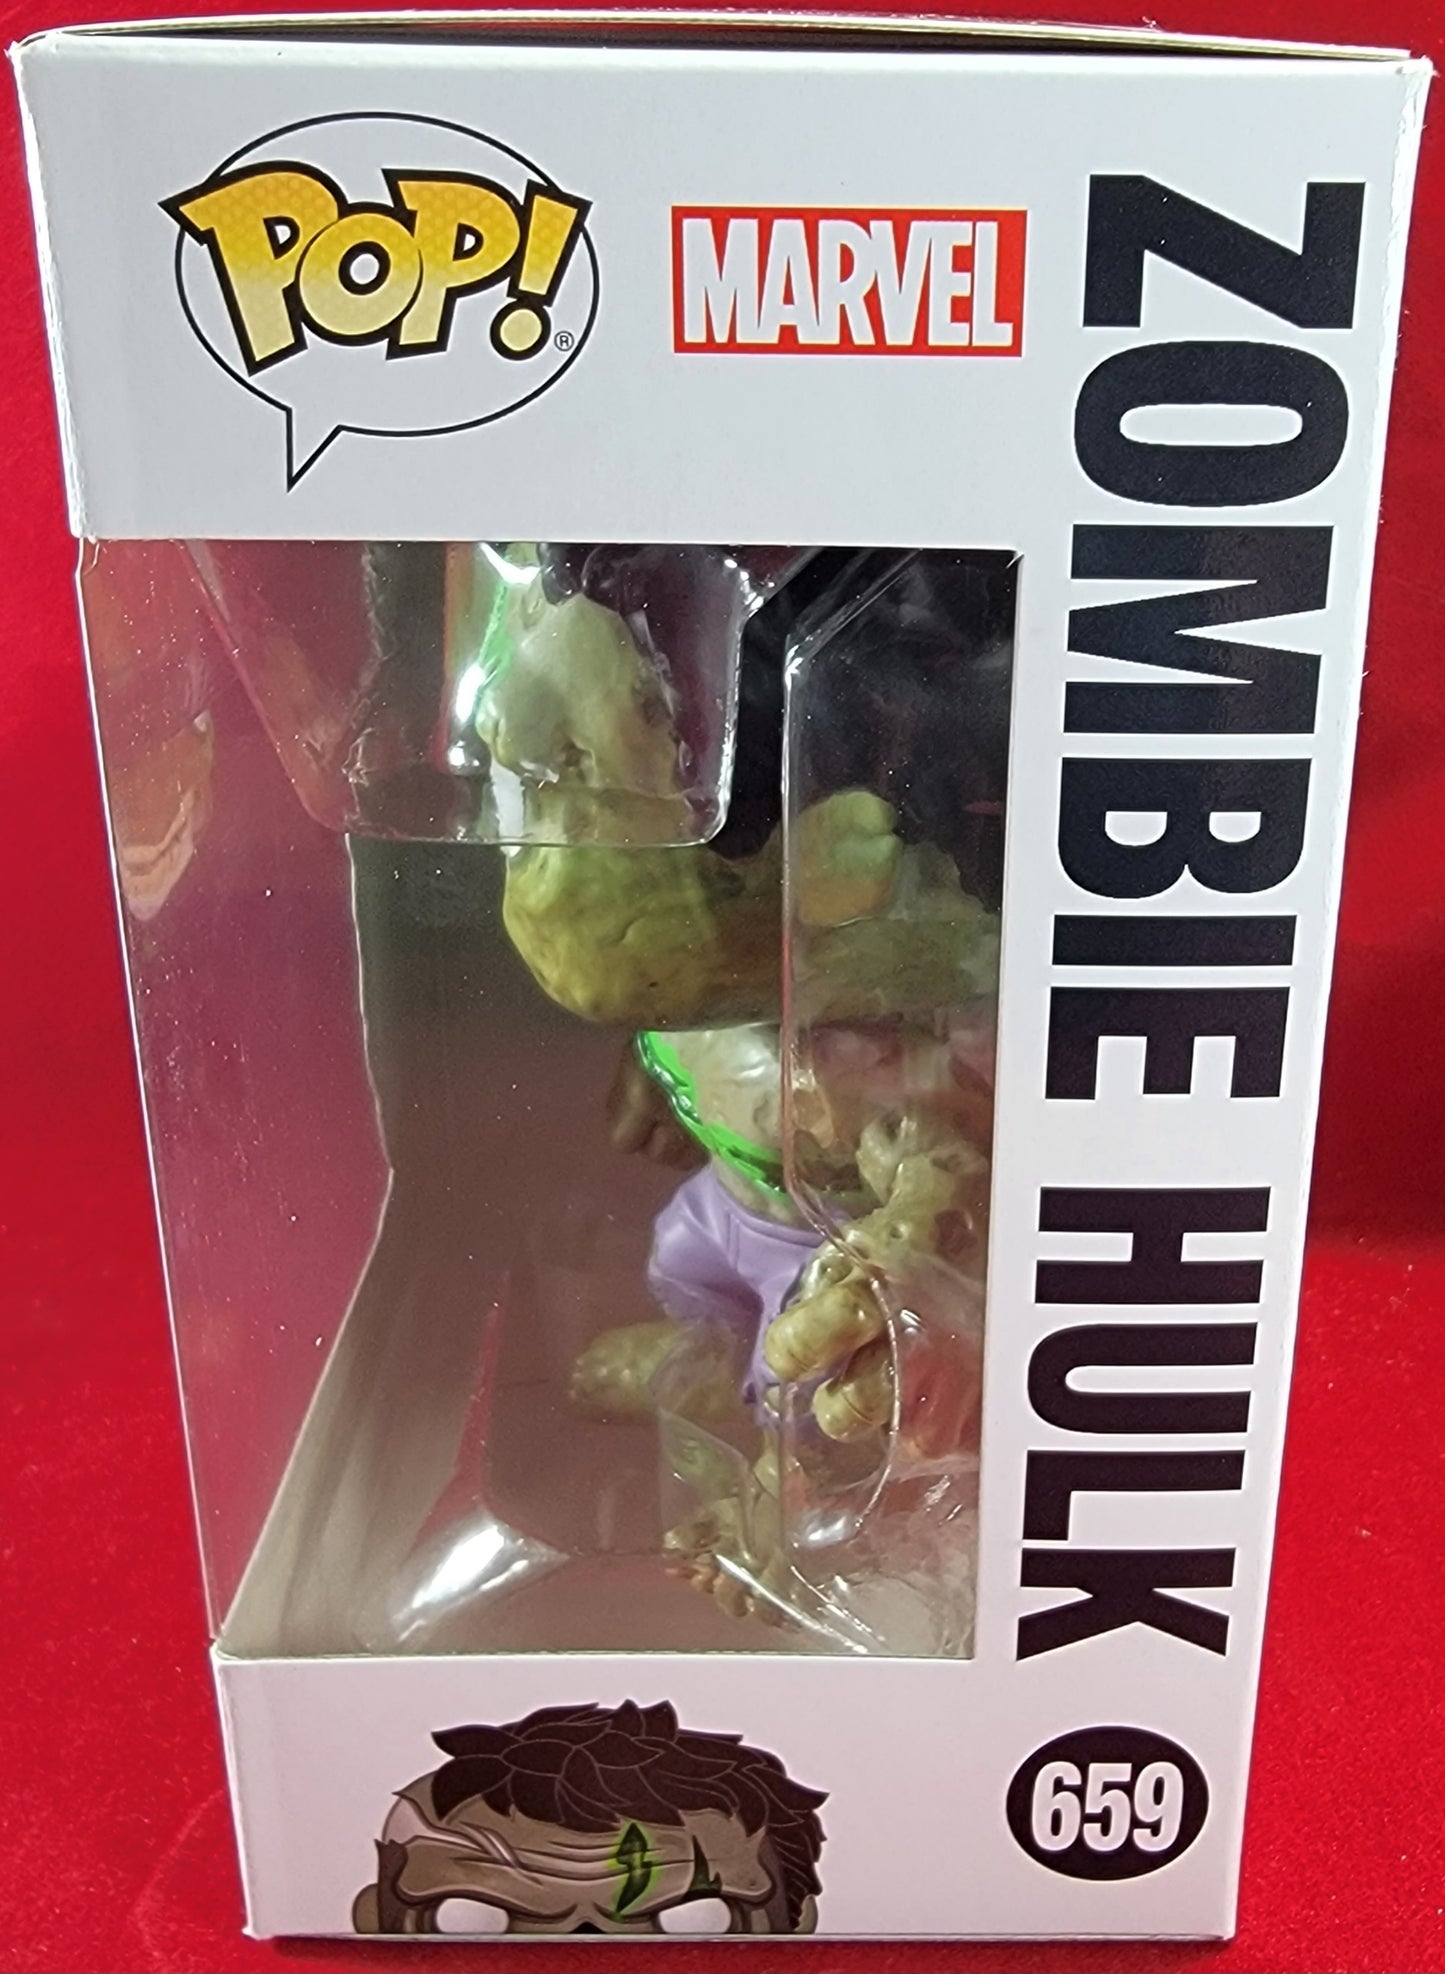 Zombie Hulk funko # 659 (nib)
brand new marvel zombies hulk funko pop. pop has Hulk in zombie form. pop has a few very lite scratches and will be shipped in a compatible pop protector.